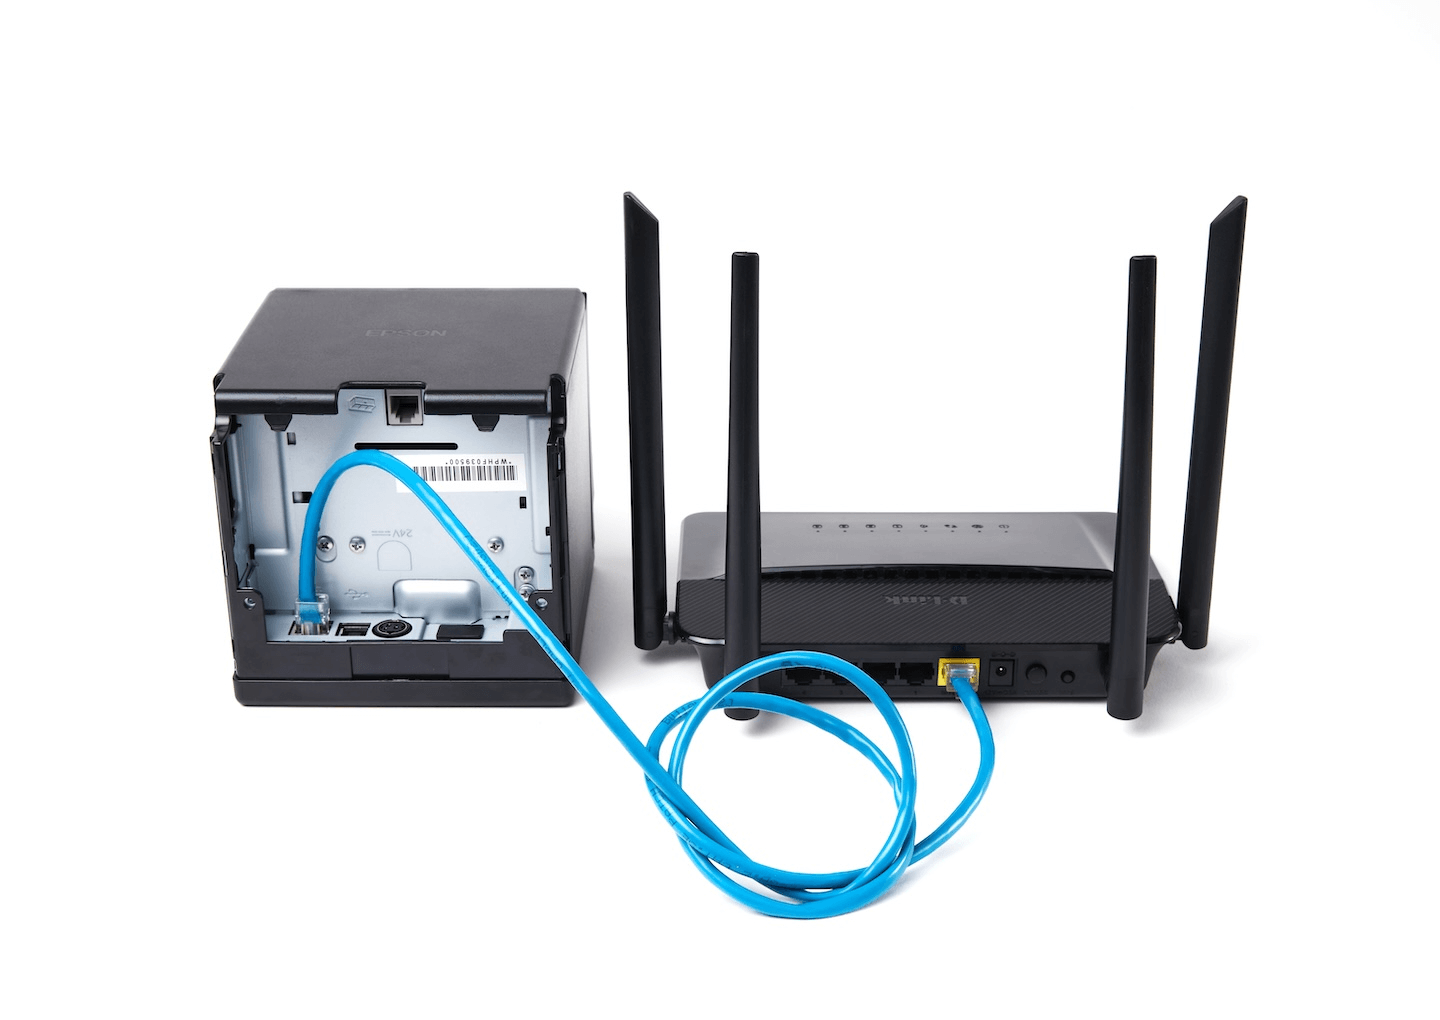 Ethernet cable, with one end connected to the printer and the other end connected to the router.